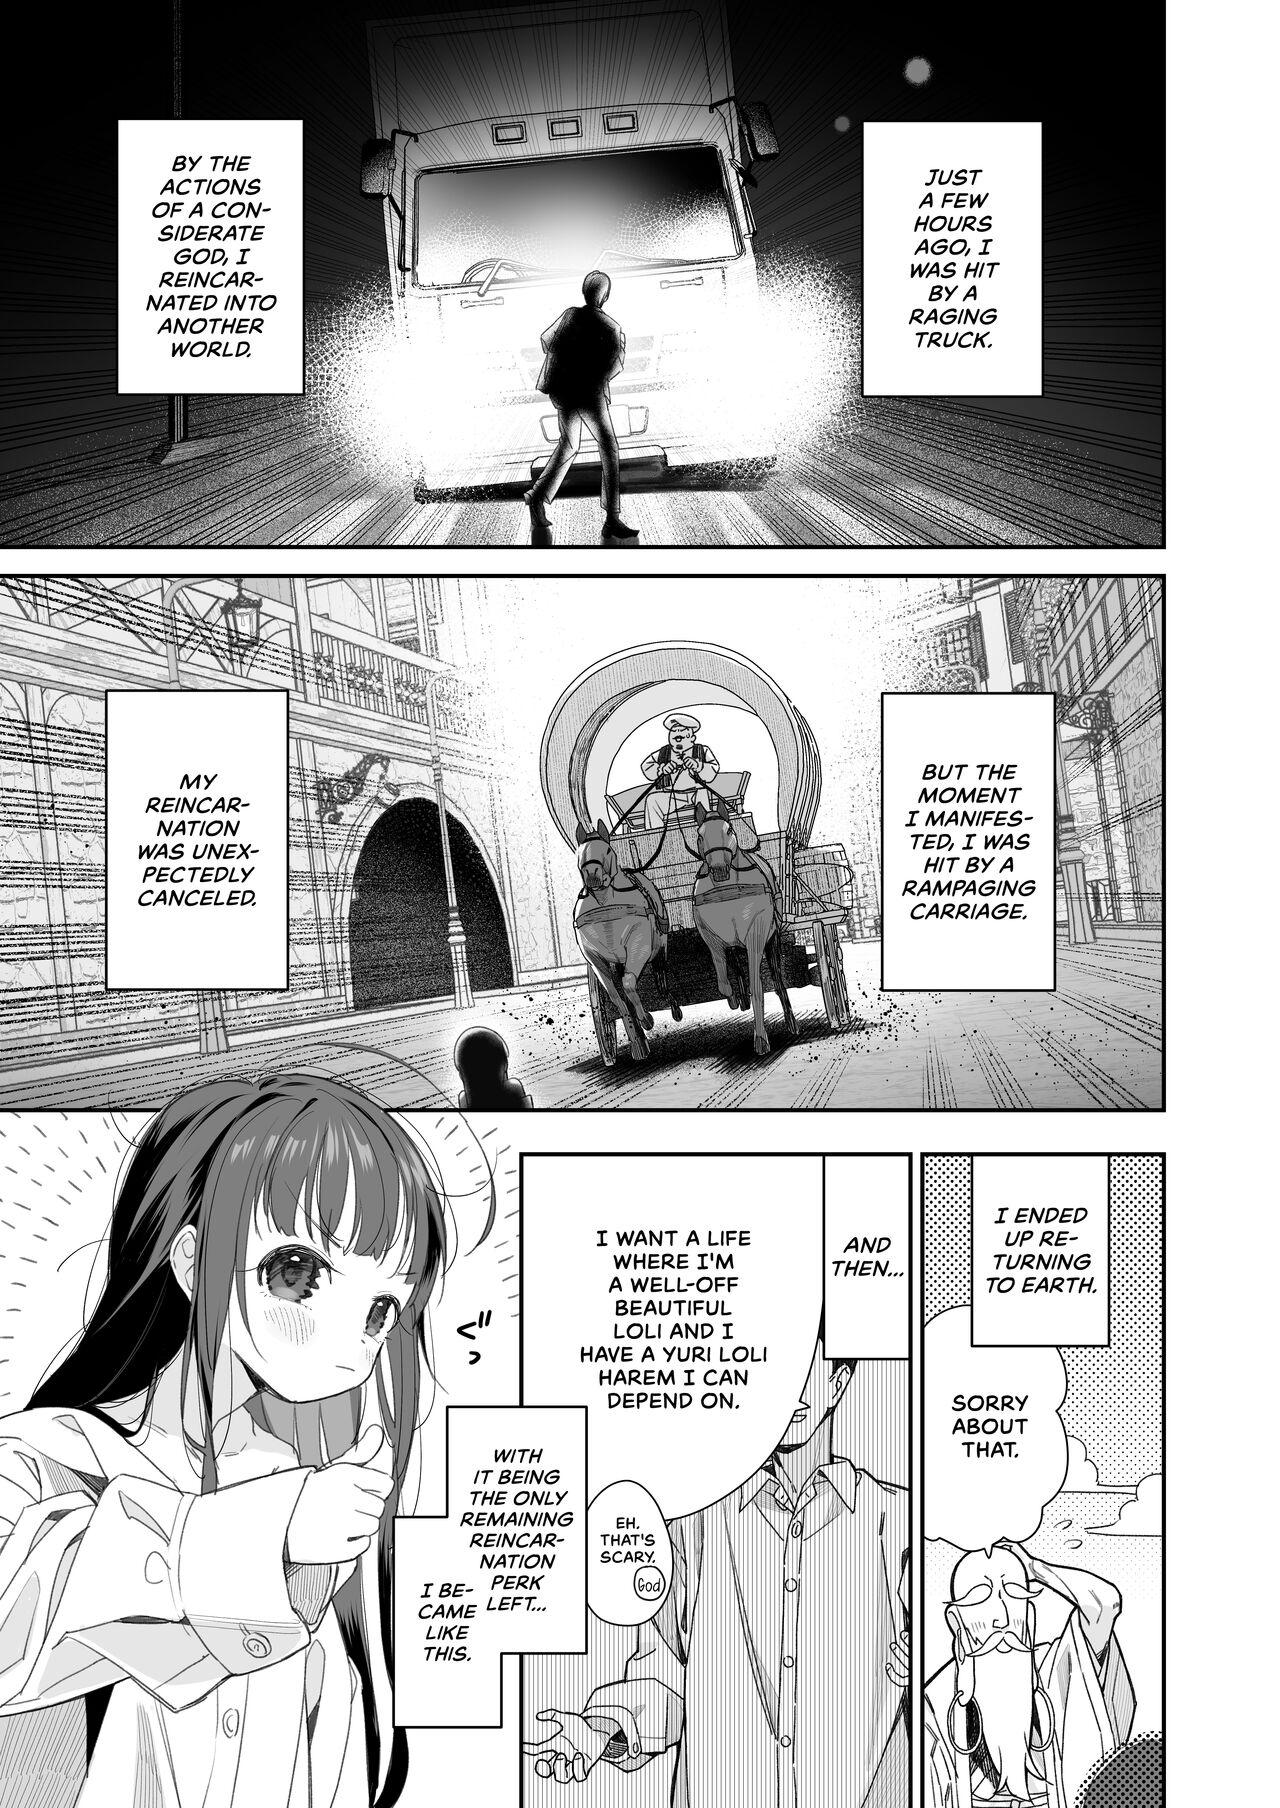 Argentina [Asunaro Neat. (Ronna)] TS Loli Oji-san no Bouken Onanie Hen | The Adventures of an Old Man Who Was Gender-Swapped Into a Loli ~Masturbation Chapter~ [English] [CulturedCommissions] [Digital] - Original Facial Cumshot - Page 4